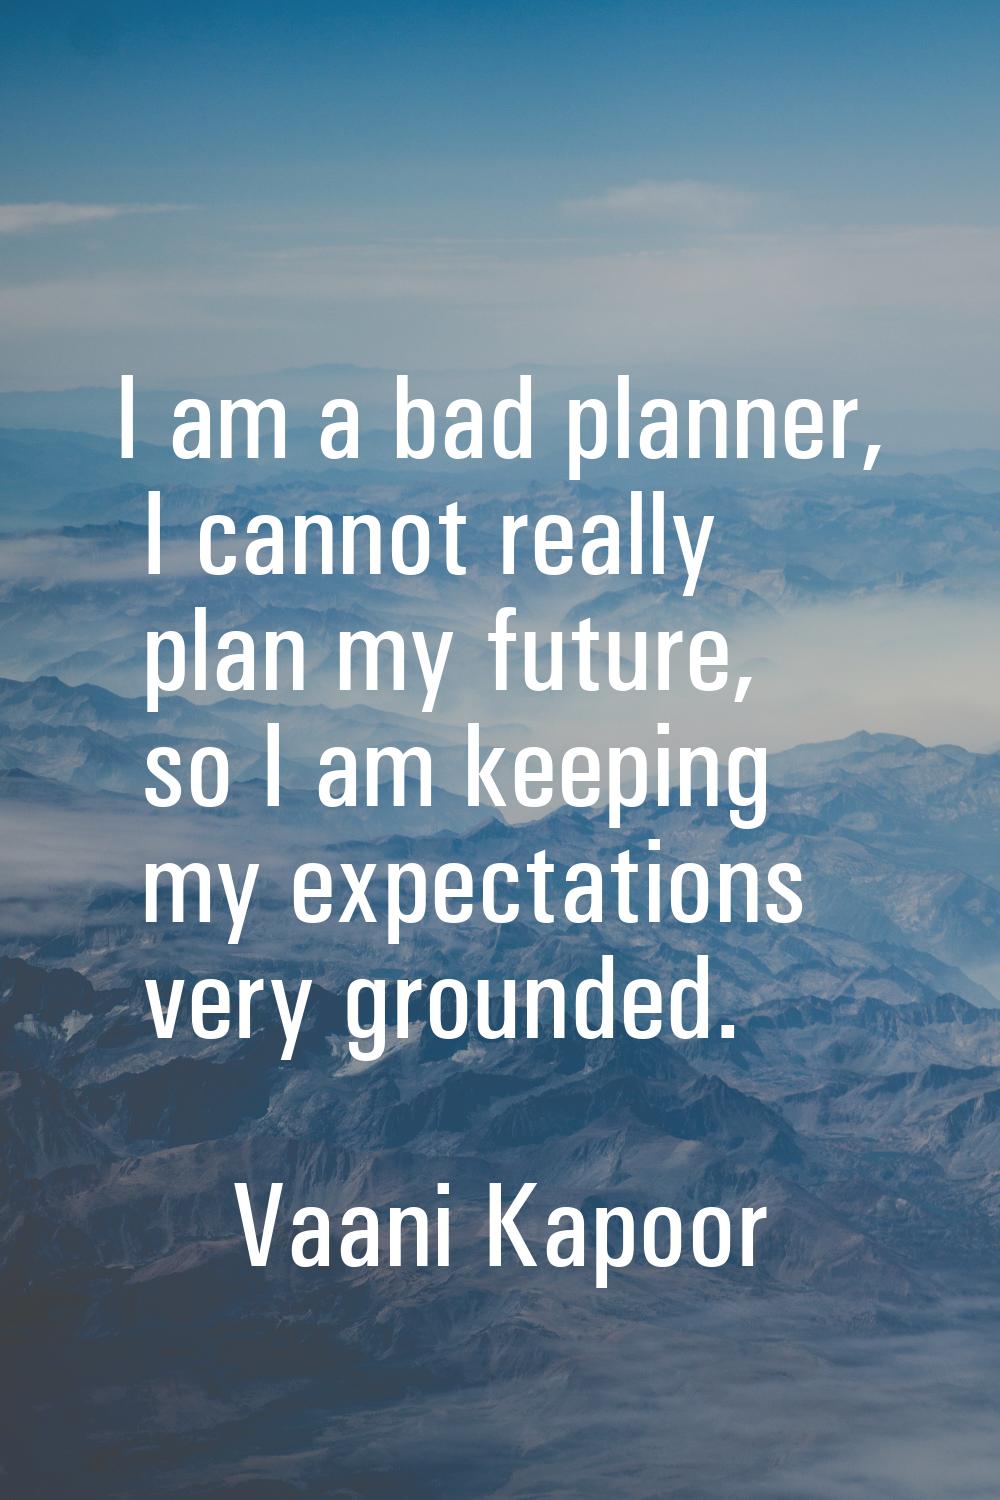 I am a bad planner, I cannot really plan my future, so I am keeping my expectations very grounded.